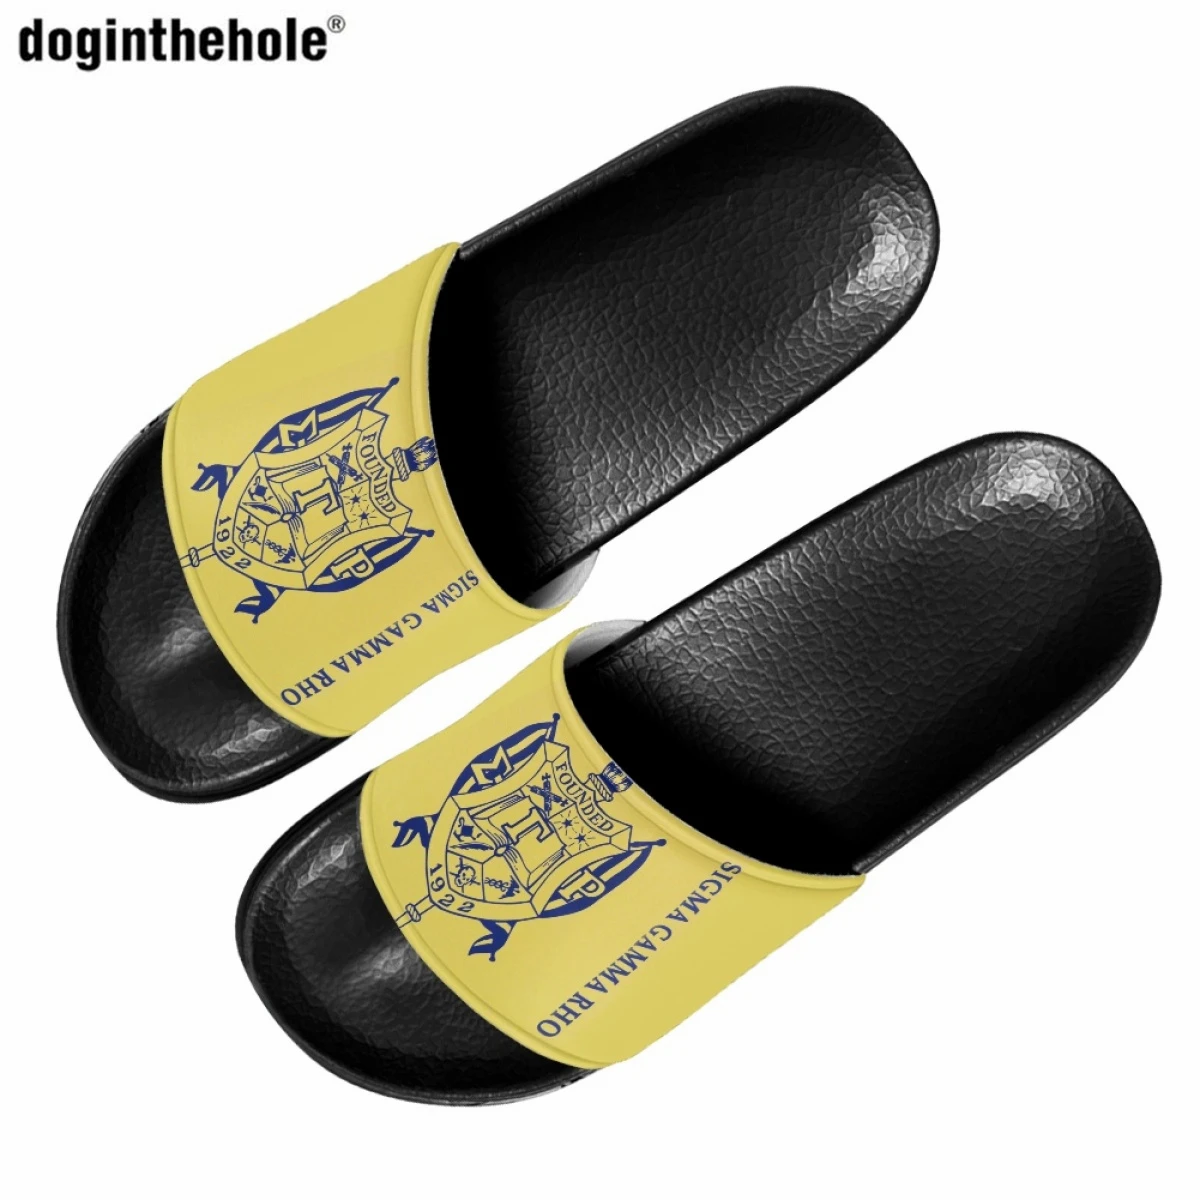 

Doginthehole Summer Home Non-Slip Bathroom Slippers for Ladies New Hot Sigma Gamma Rho Sorority Outdoor Couple Beach Sandals